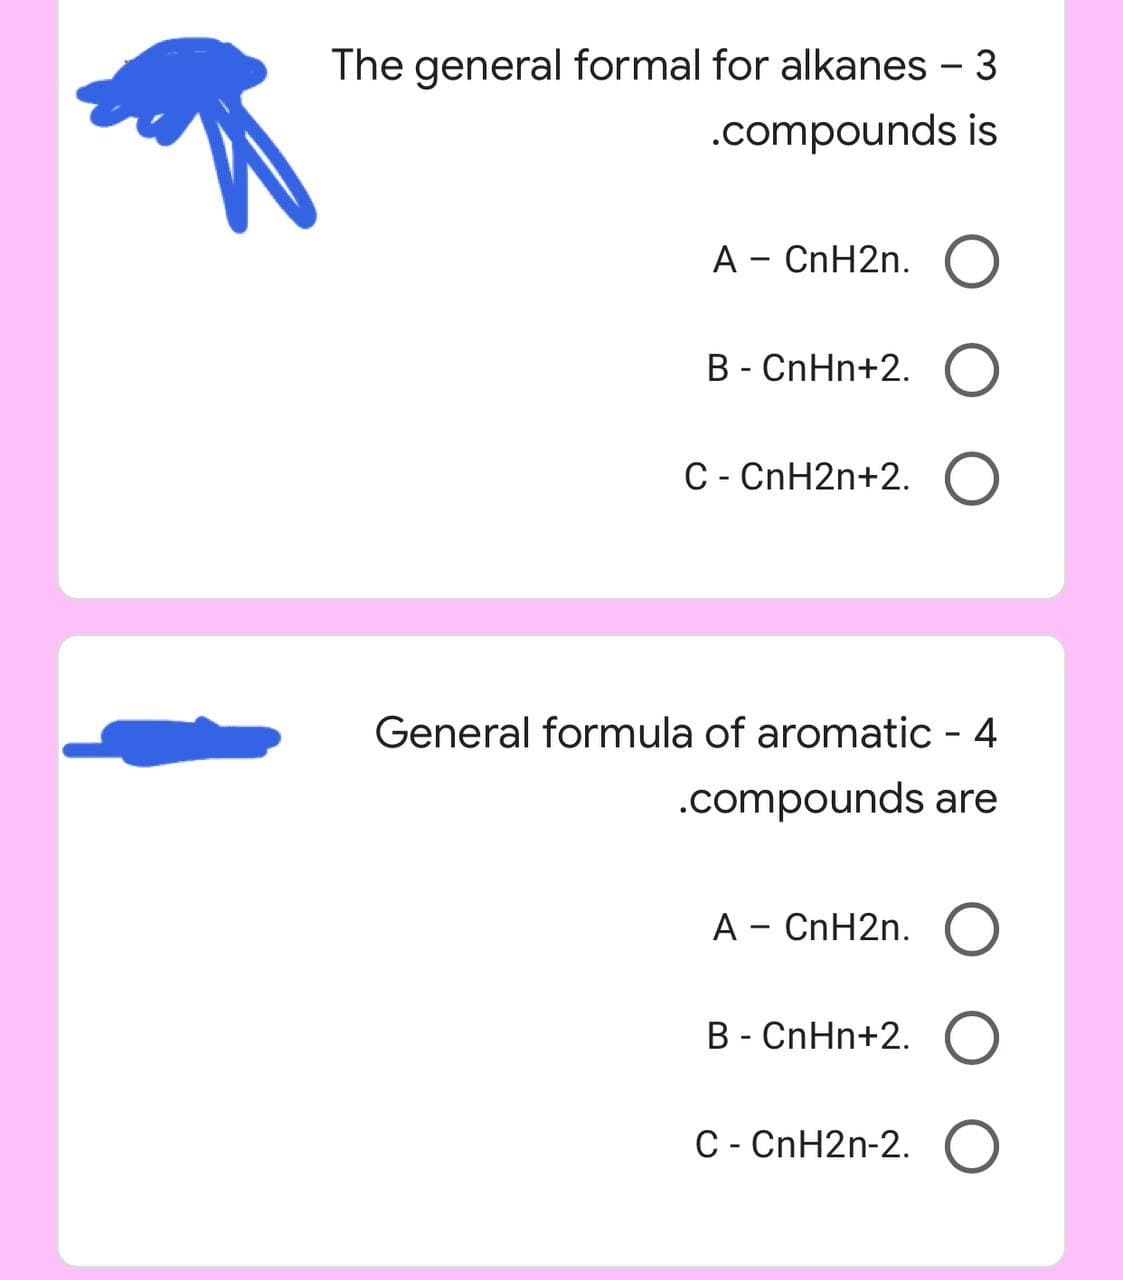 The general formal for alkanes - 3
.compounds is
A - CnH2n. O
B - CnHn+2. O
C - CnH2n+2. O
General formula of aromatic - 4
.compounds are
A - CnH2n. O
B - CnHn+2. O
C - CnH2n-2. O